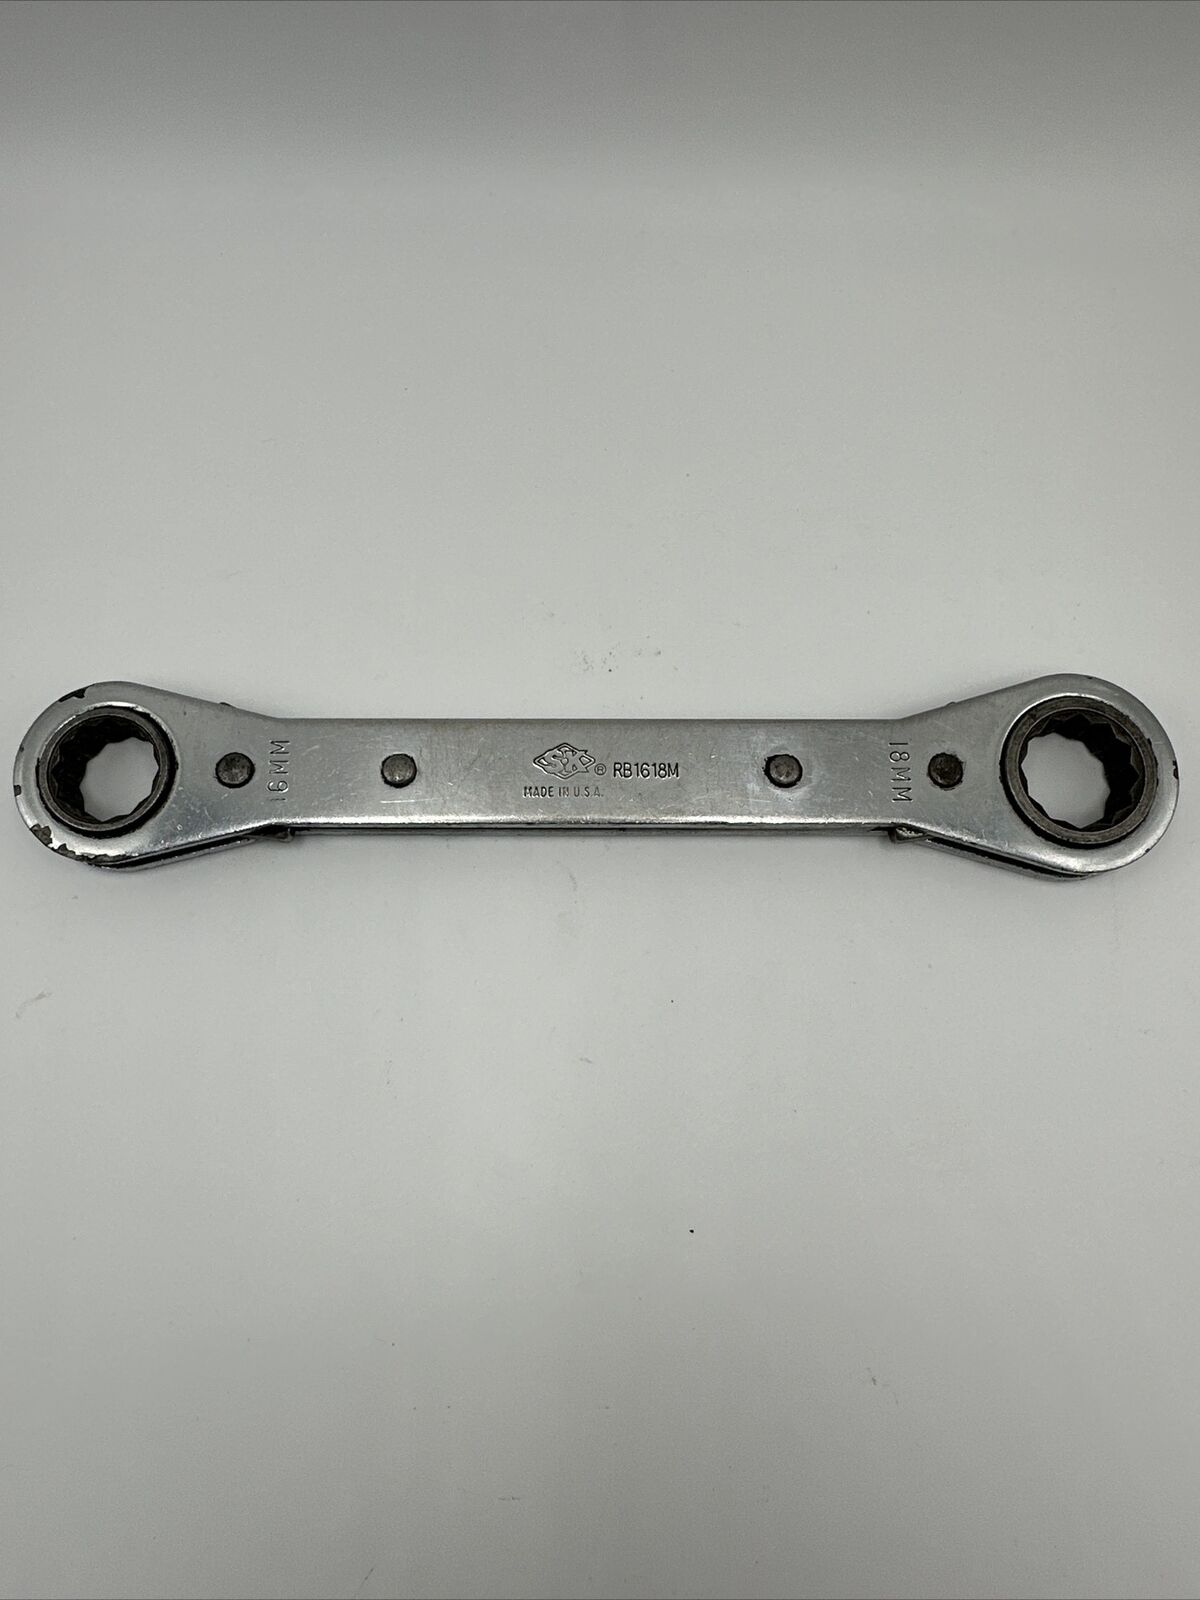 SK Professional Double Box Universal Spline Wrench RB1618M 18x16mm *USA*